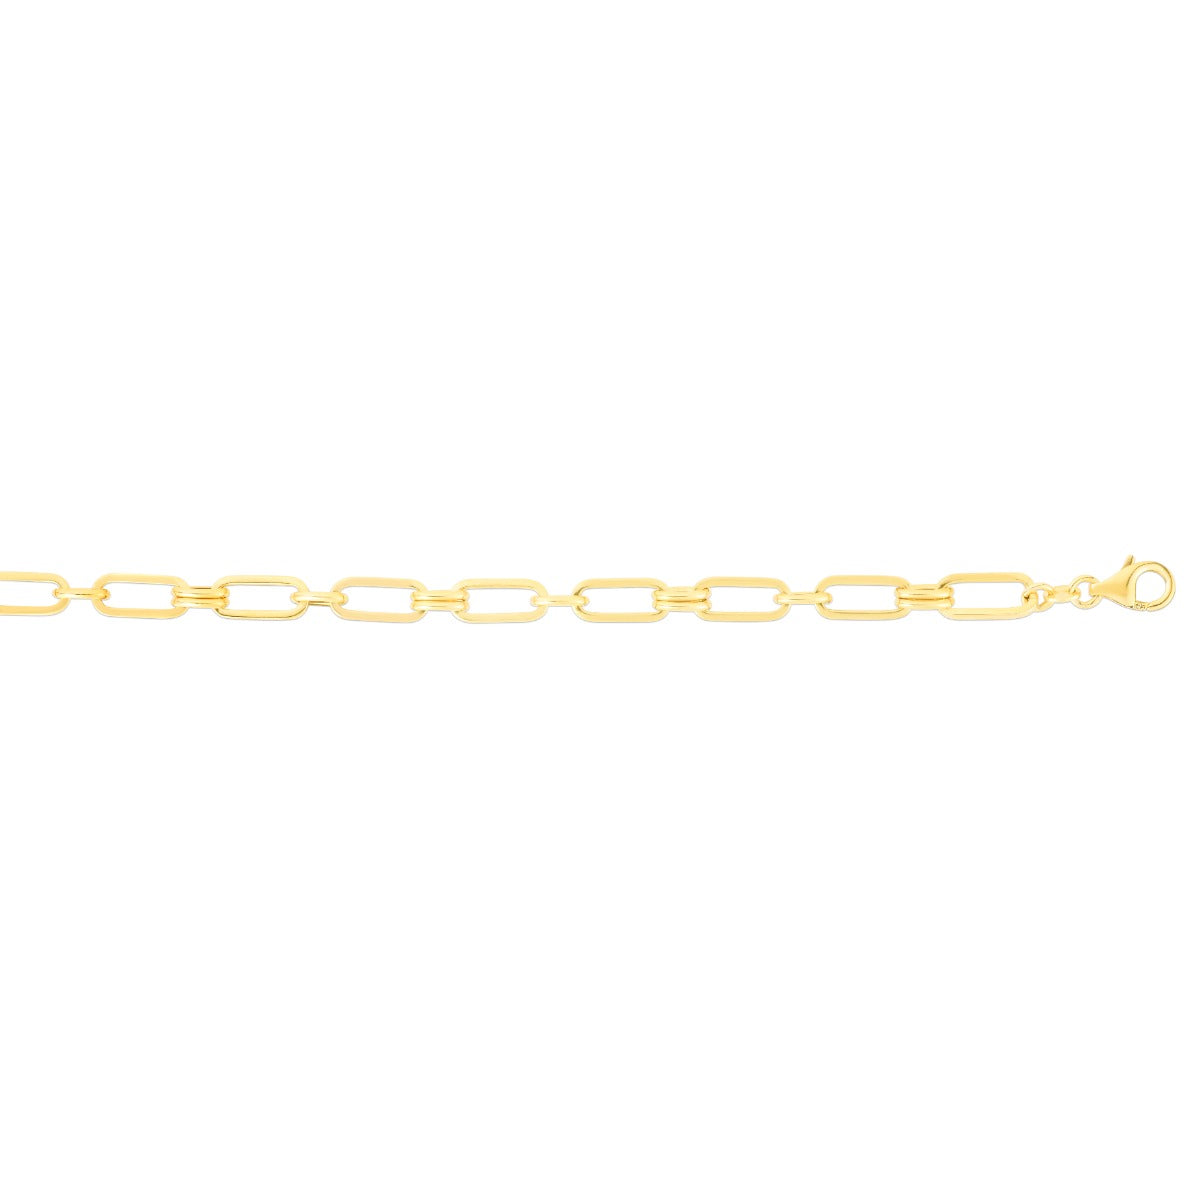 14K Gold Paperclip Rondel Link Chain with Lobster Clasp.